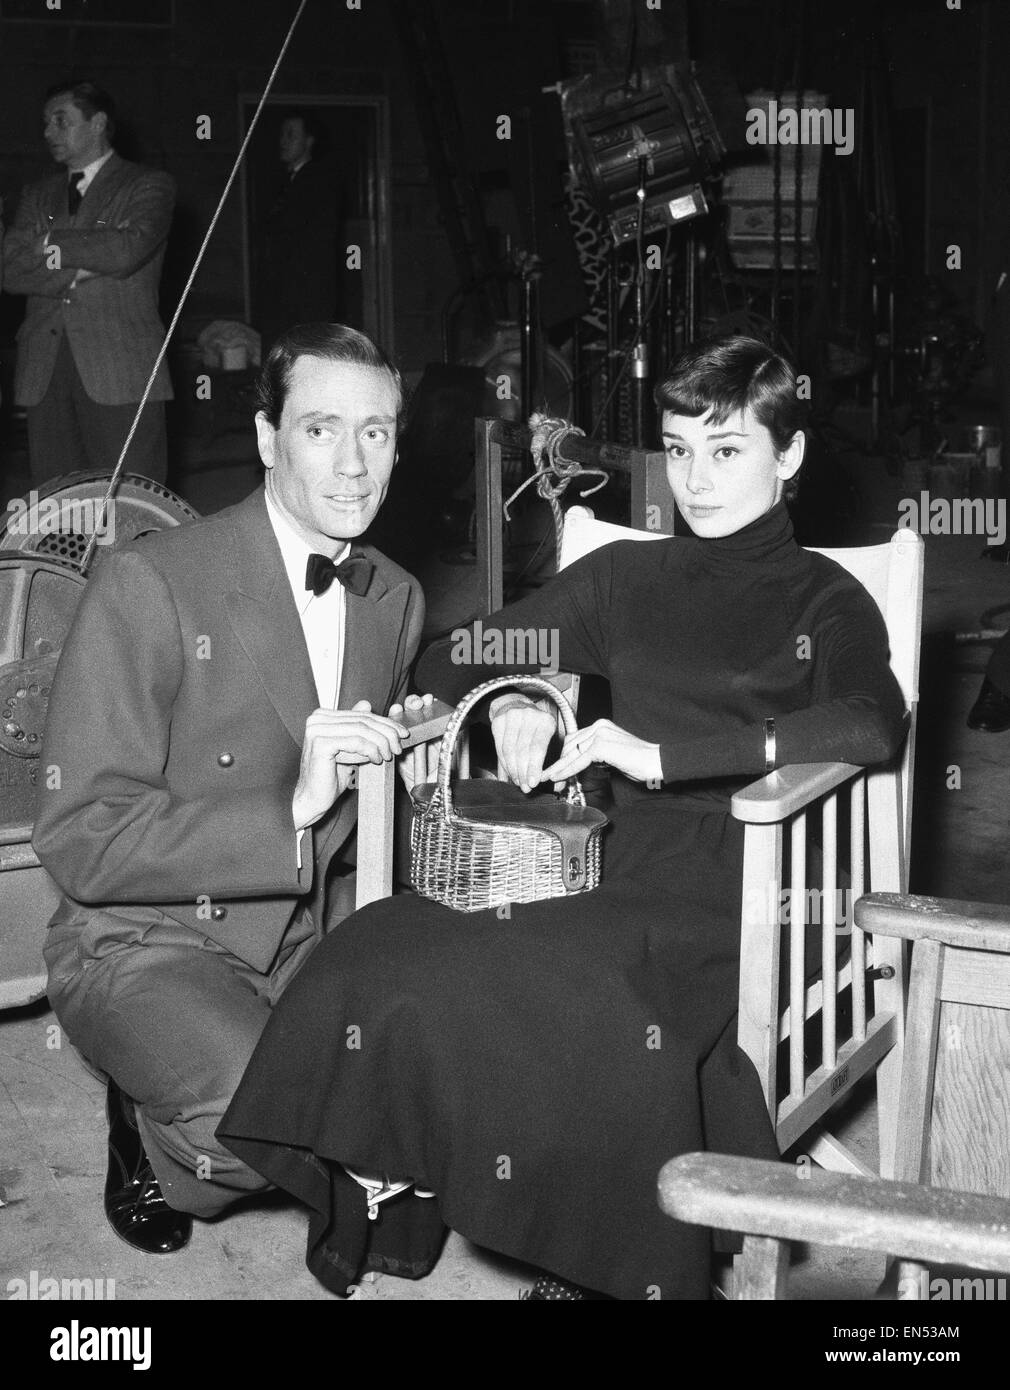 Actress Audrey Hepburn with her American film actor husband Mel Ferrer at Pinewood Studios. 15th February 1955. Stock Photo